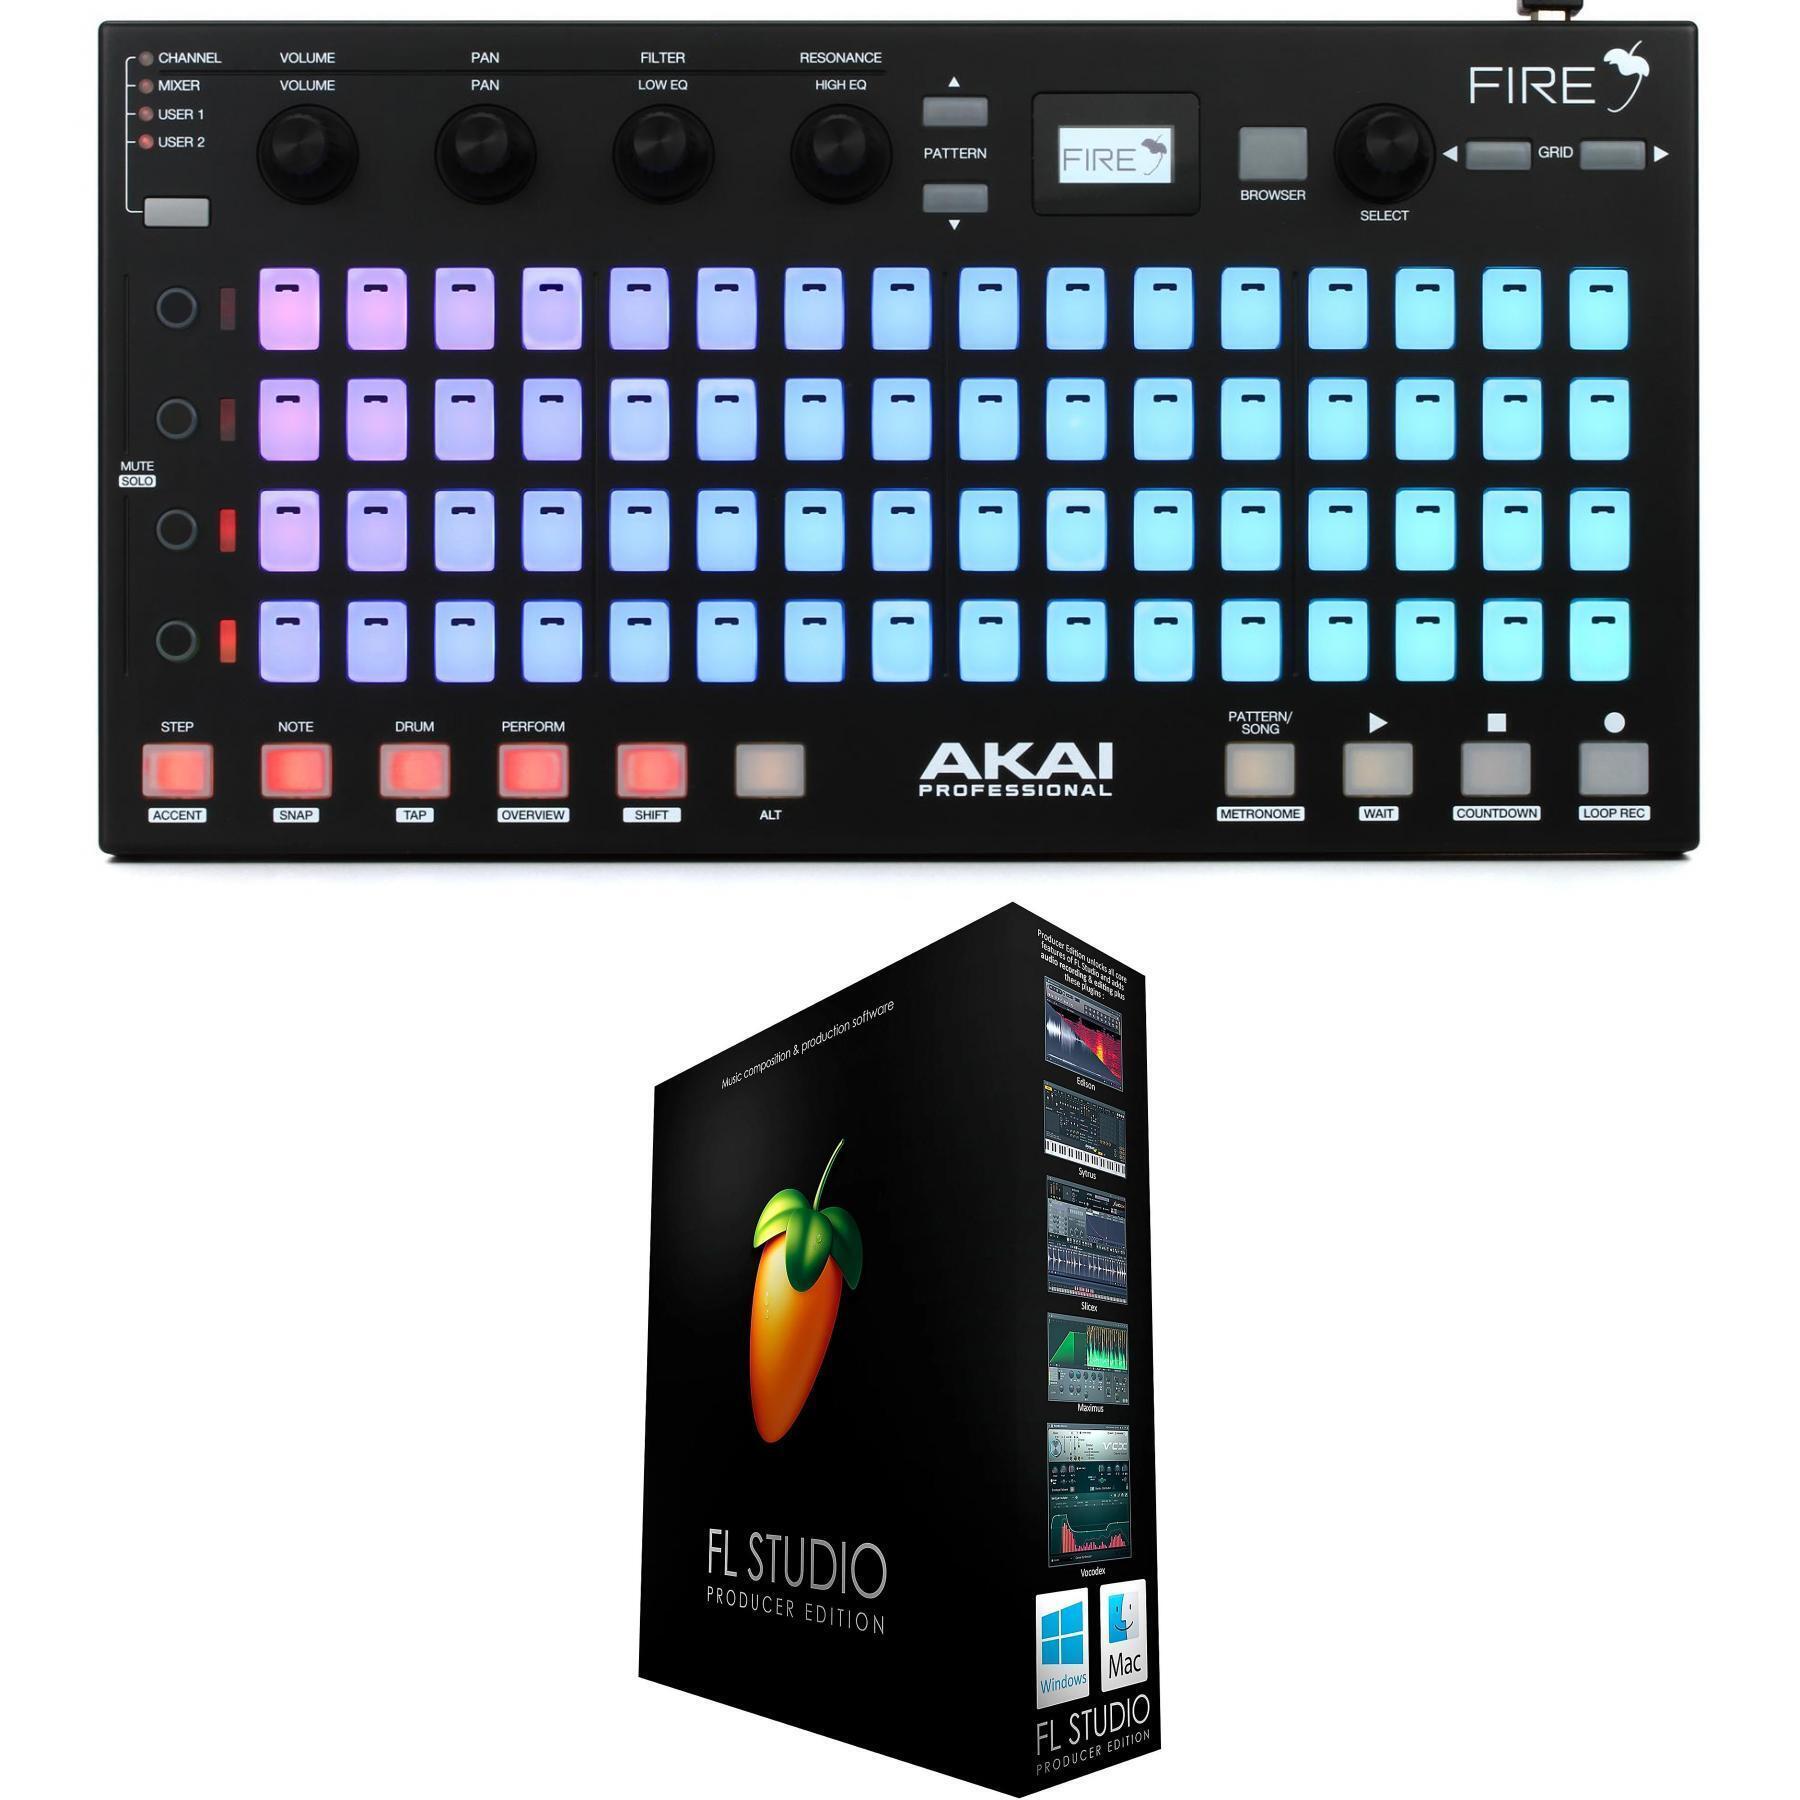 Akai Professional Fire Grid Controller with FL Studio Producer